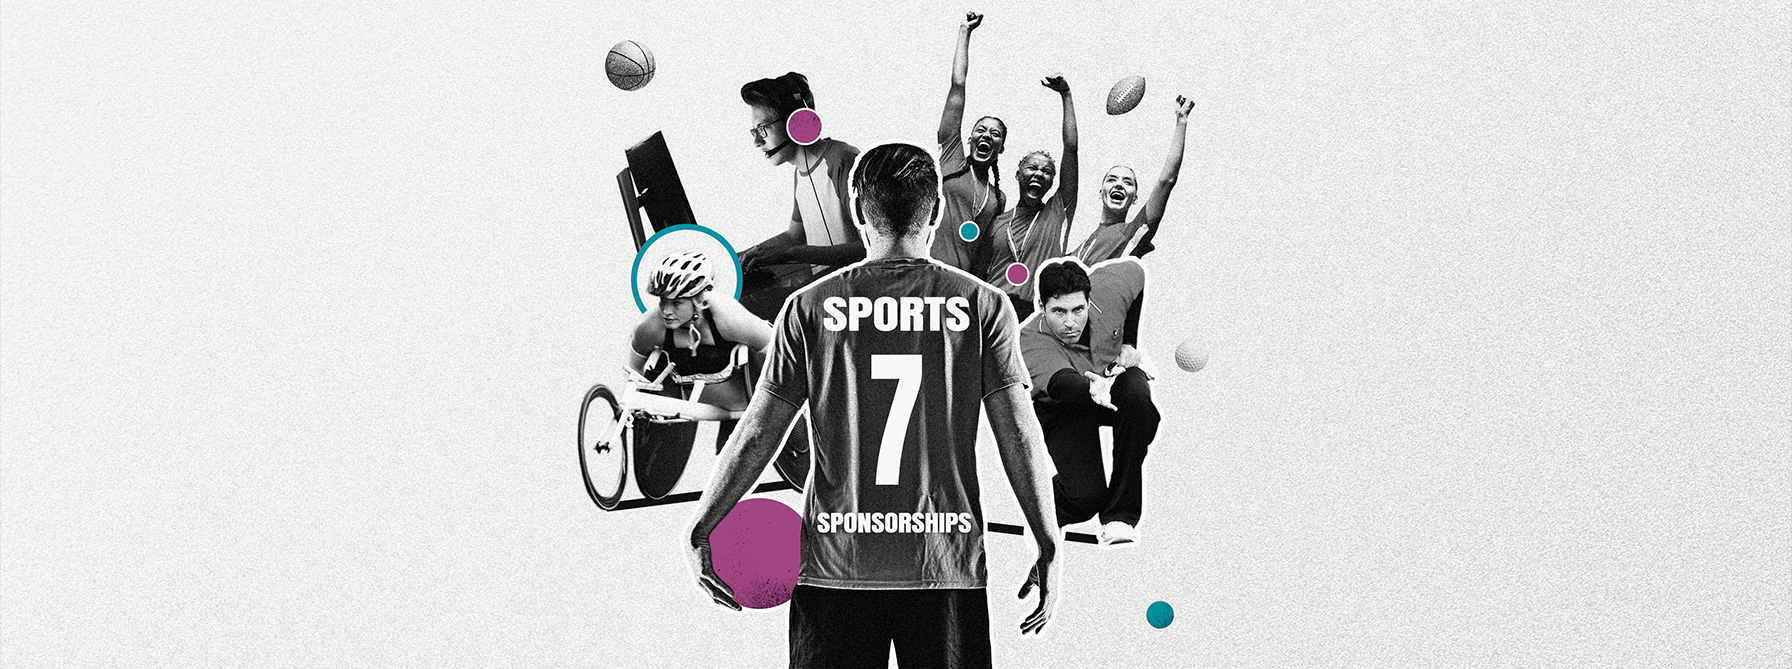 Sports sponsorships: how finance brands can play the game